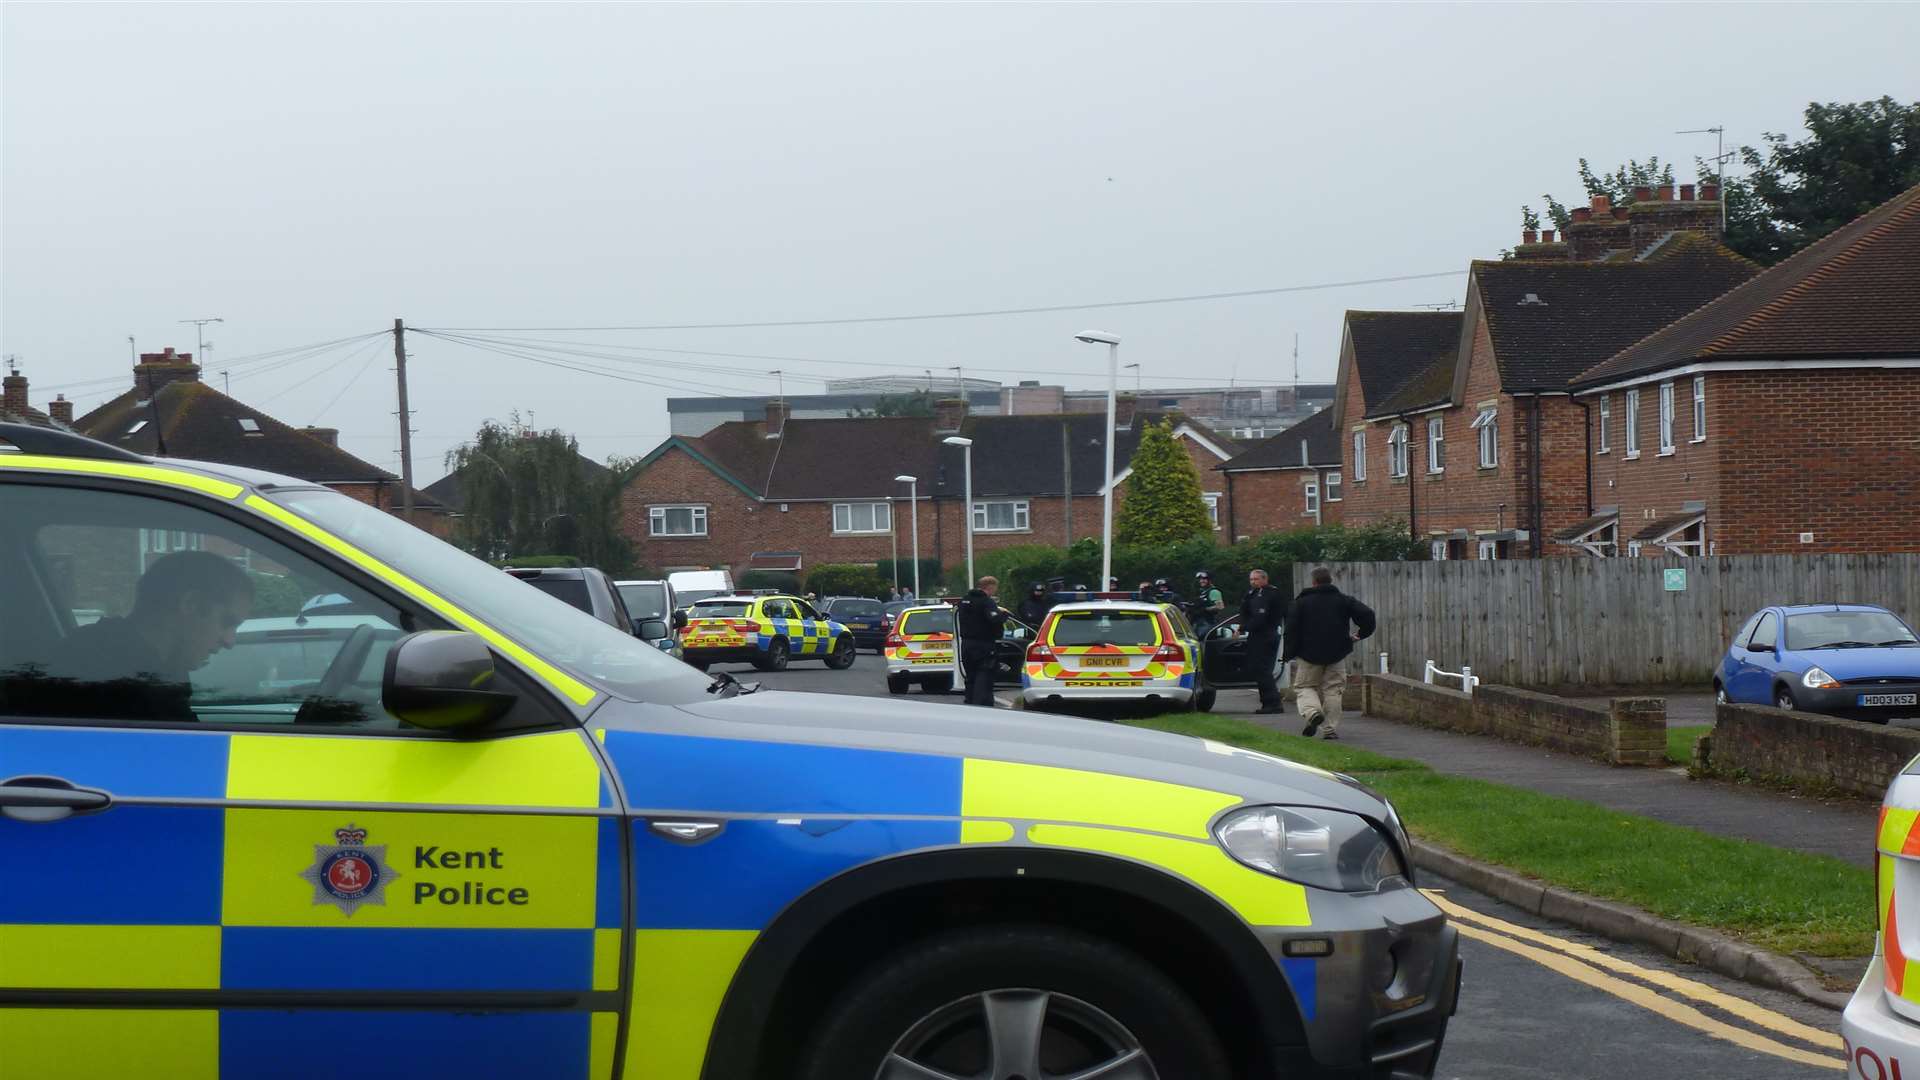 Police dealing with a previous incident at Cade Road in 2013.